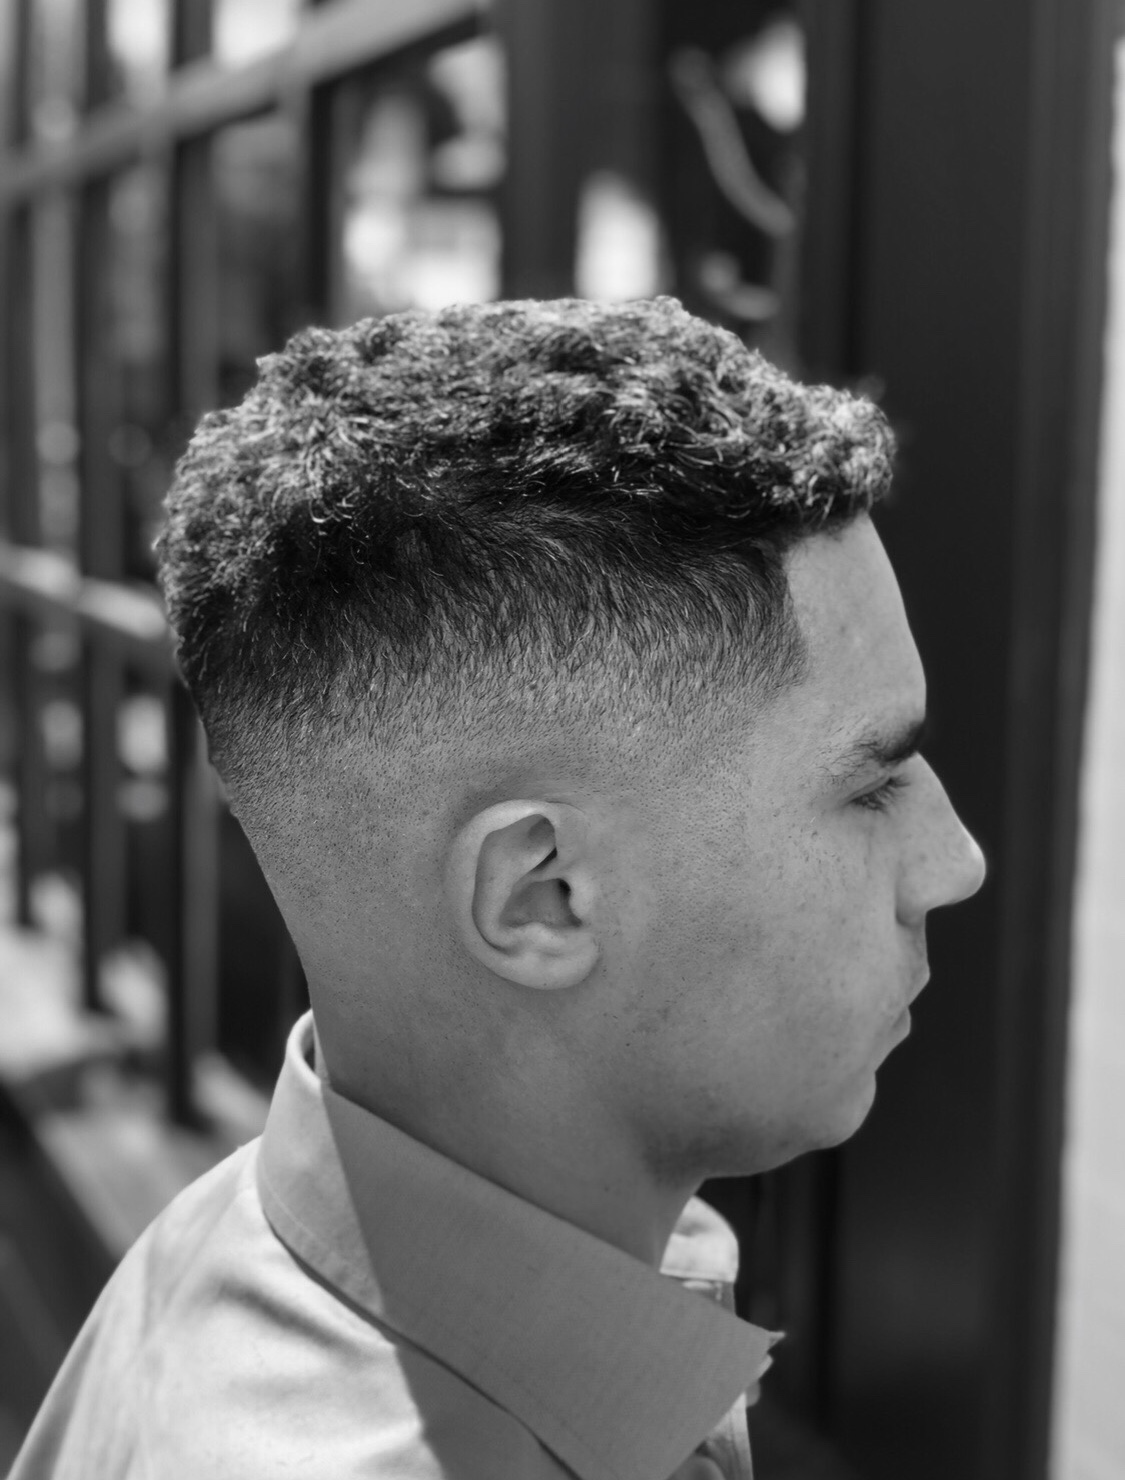 Discover the Latest Trends in Boy Cool Haircuts - Judes Barbershop